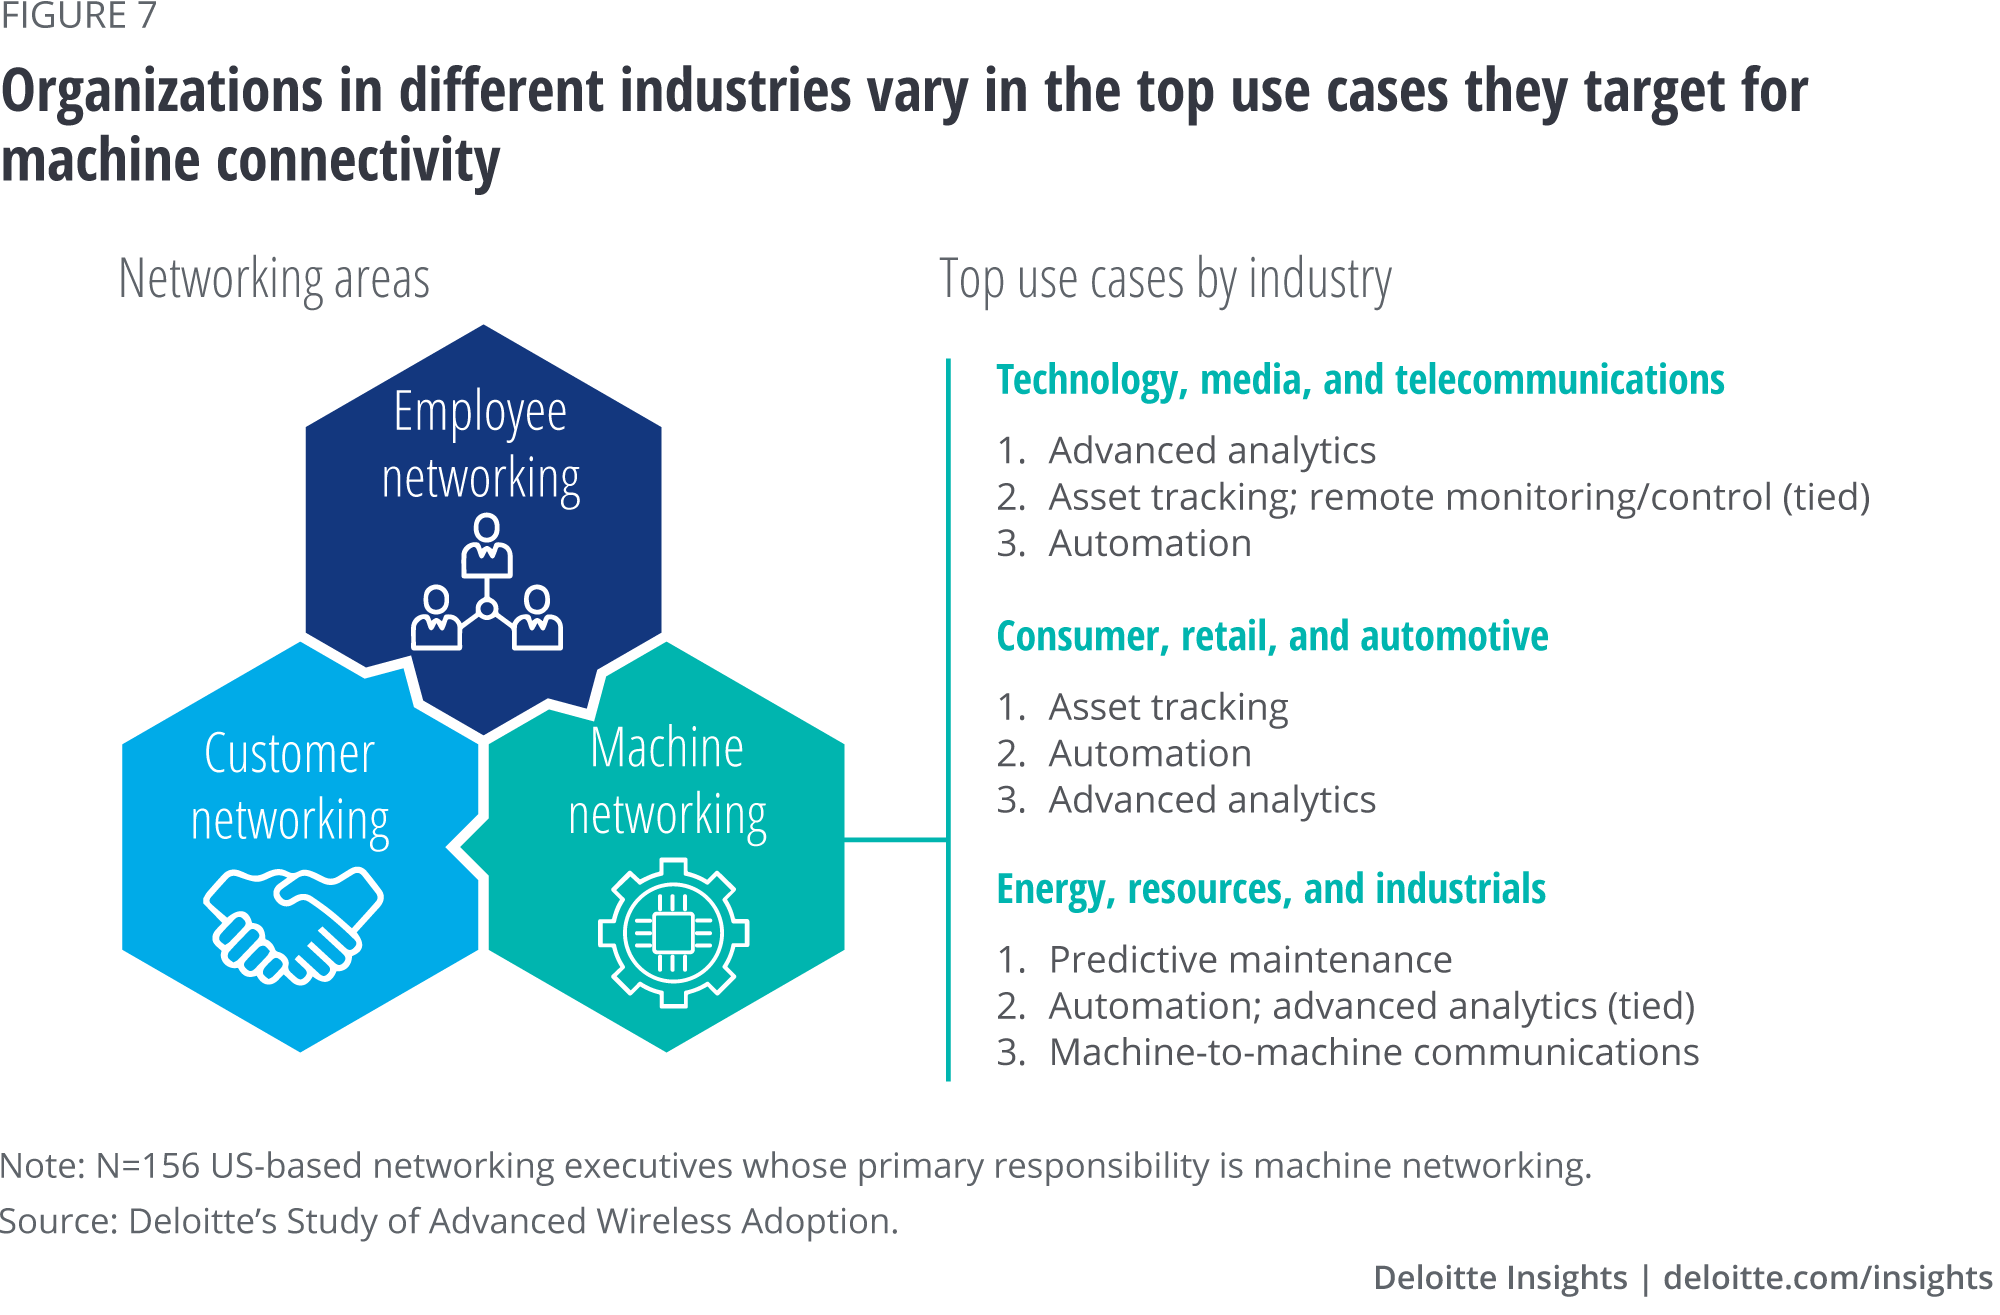 Organizations in different industries vary in the top use cases they target for machine connectivity